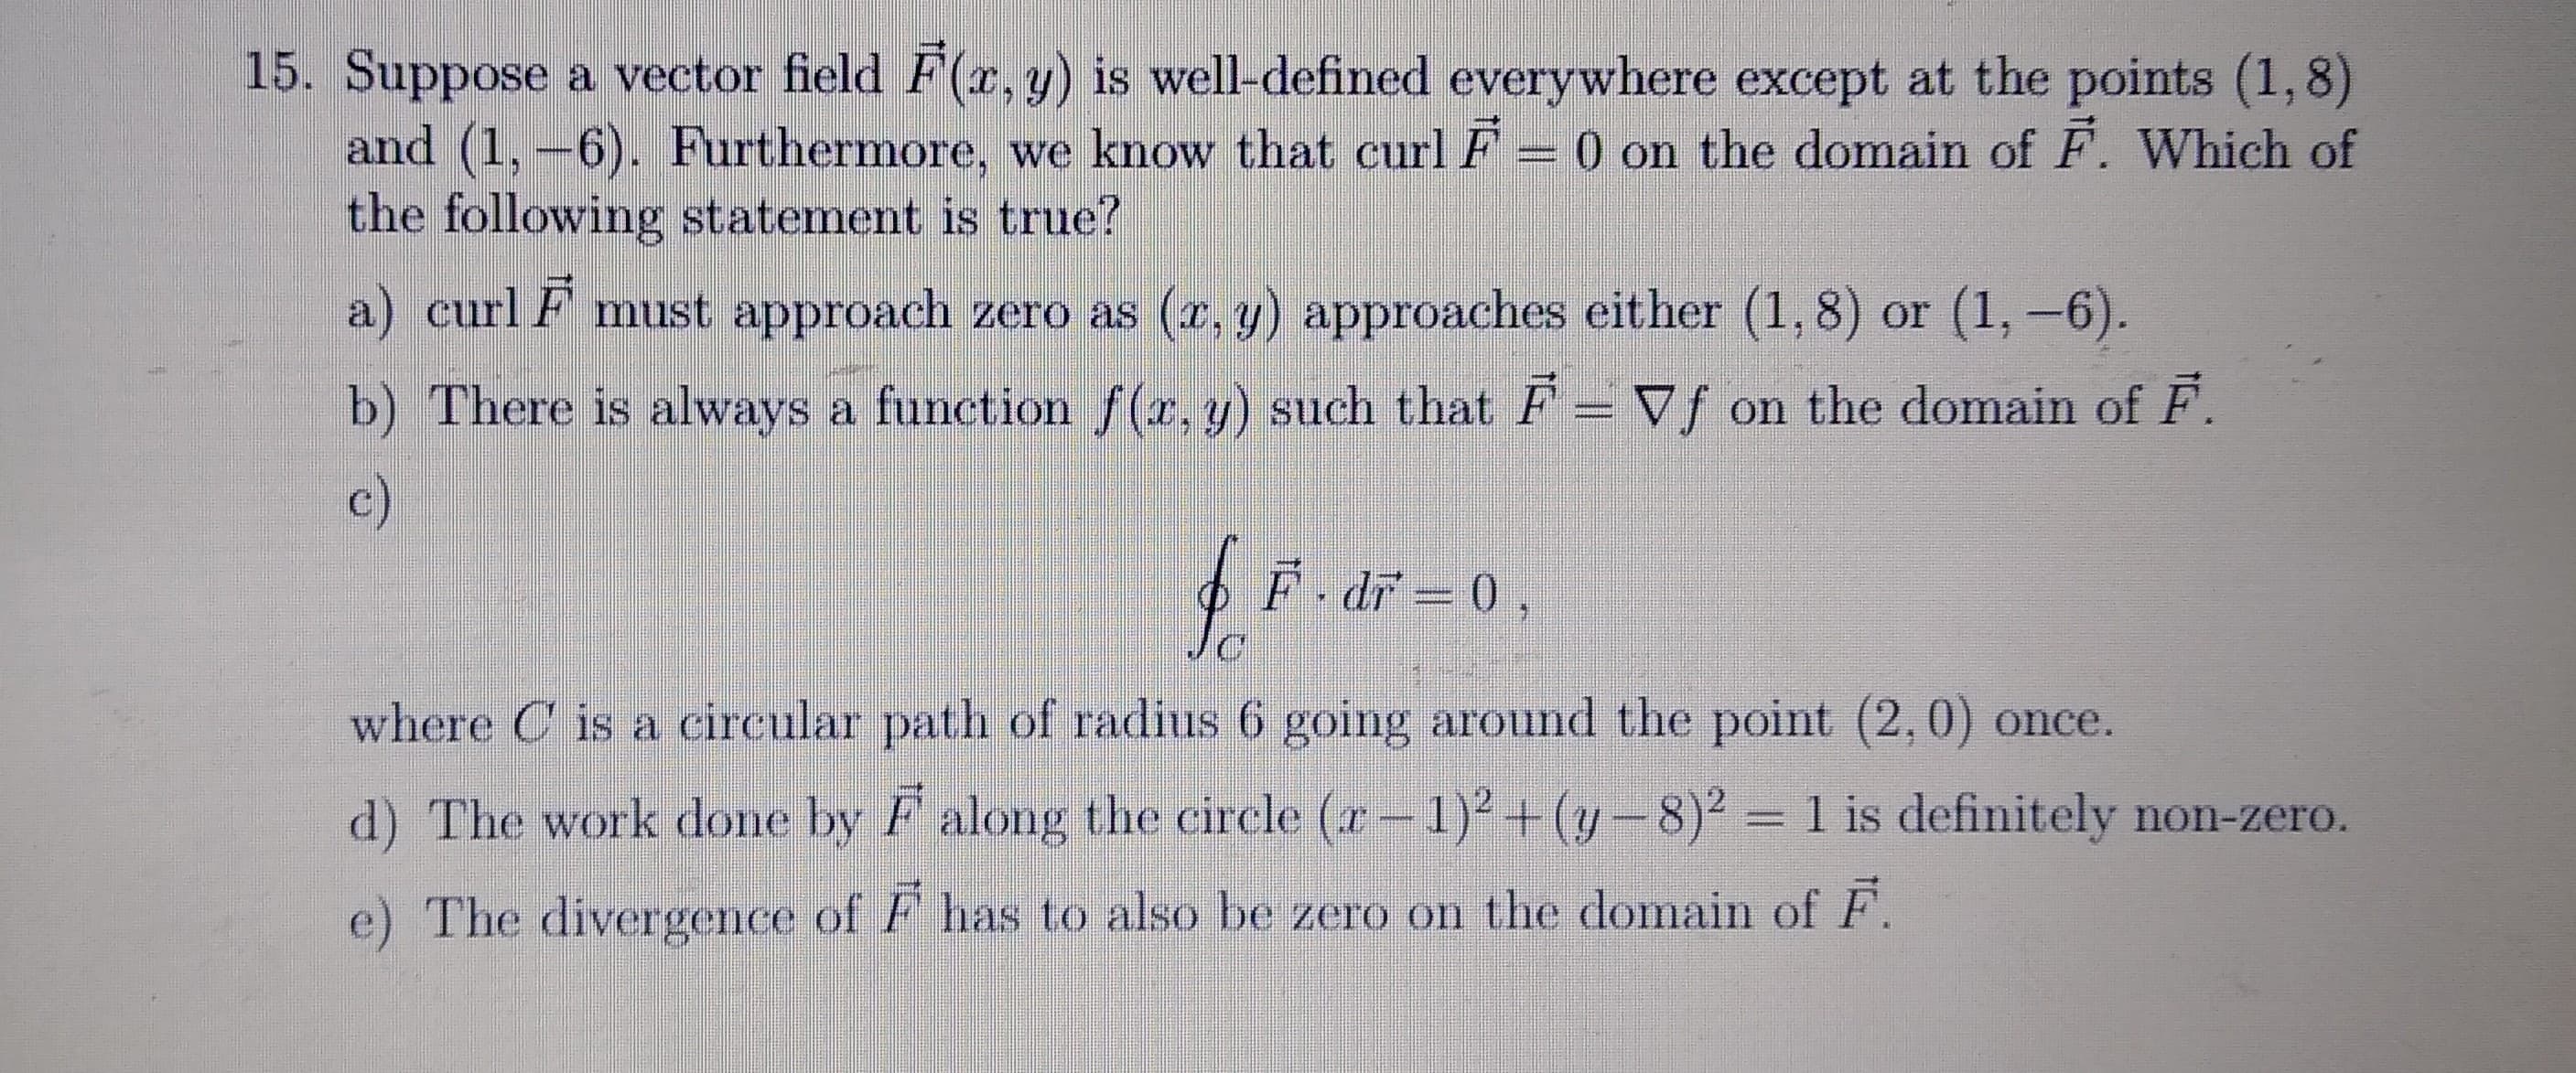 15. Suppose a vector field F(r, y) is well-defined everywhere except at the points (1,8)
and (1, -6). Furthermore, we know that curl F 0 on the domain of F. Which of
the following statement is true?
a) curl F must approach zero ás (e. y) approaches either (1, 8) or (1,-6).
b) There is always a function (e.y) such that F = Vf on the domain of F.
c)
F dr =0.
where C is a circular path of radius 6 going around the point (2,0) once.
d) The work done by Faloug the circle (r-1)+(y-8)² = 1 is definitely non-zero.
e) The divergence of F has to also be zero on the domain of F.
